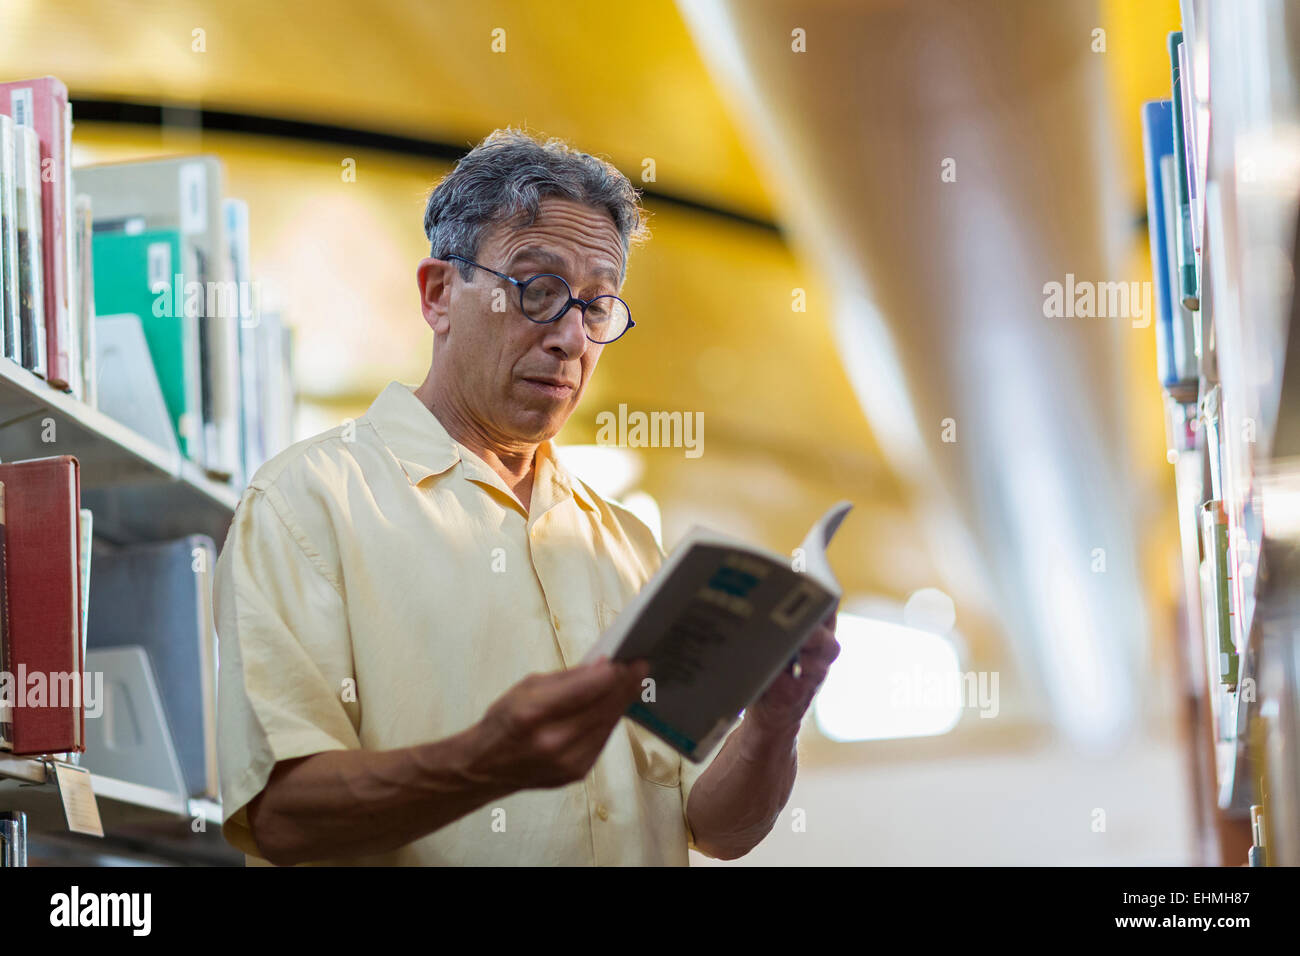 Older Caucasian man reading book in library Stock Photo